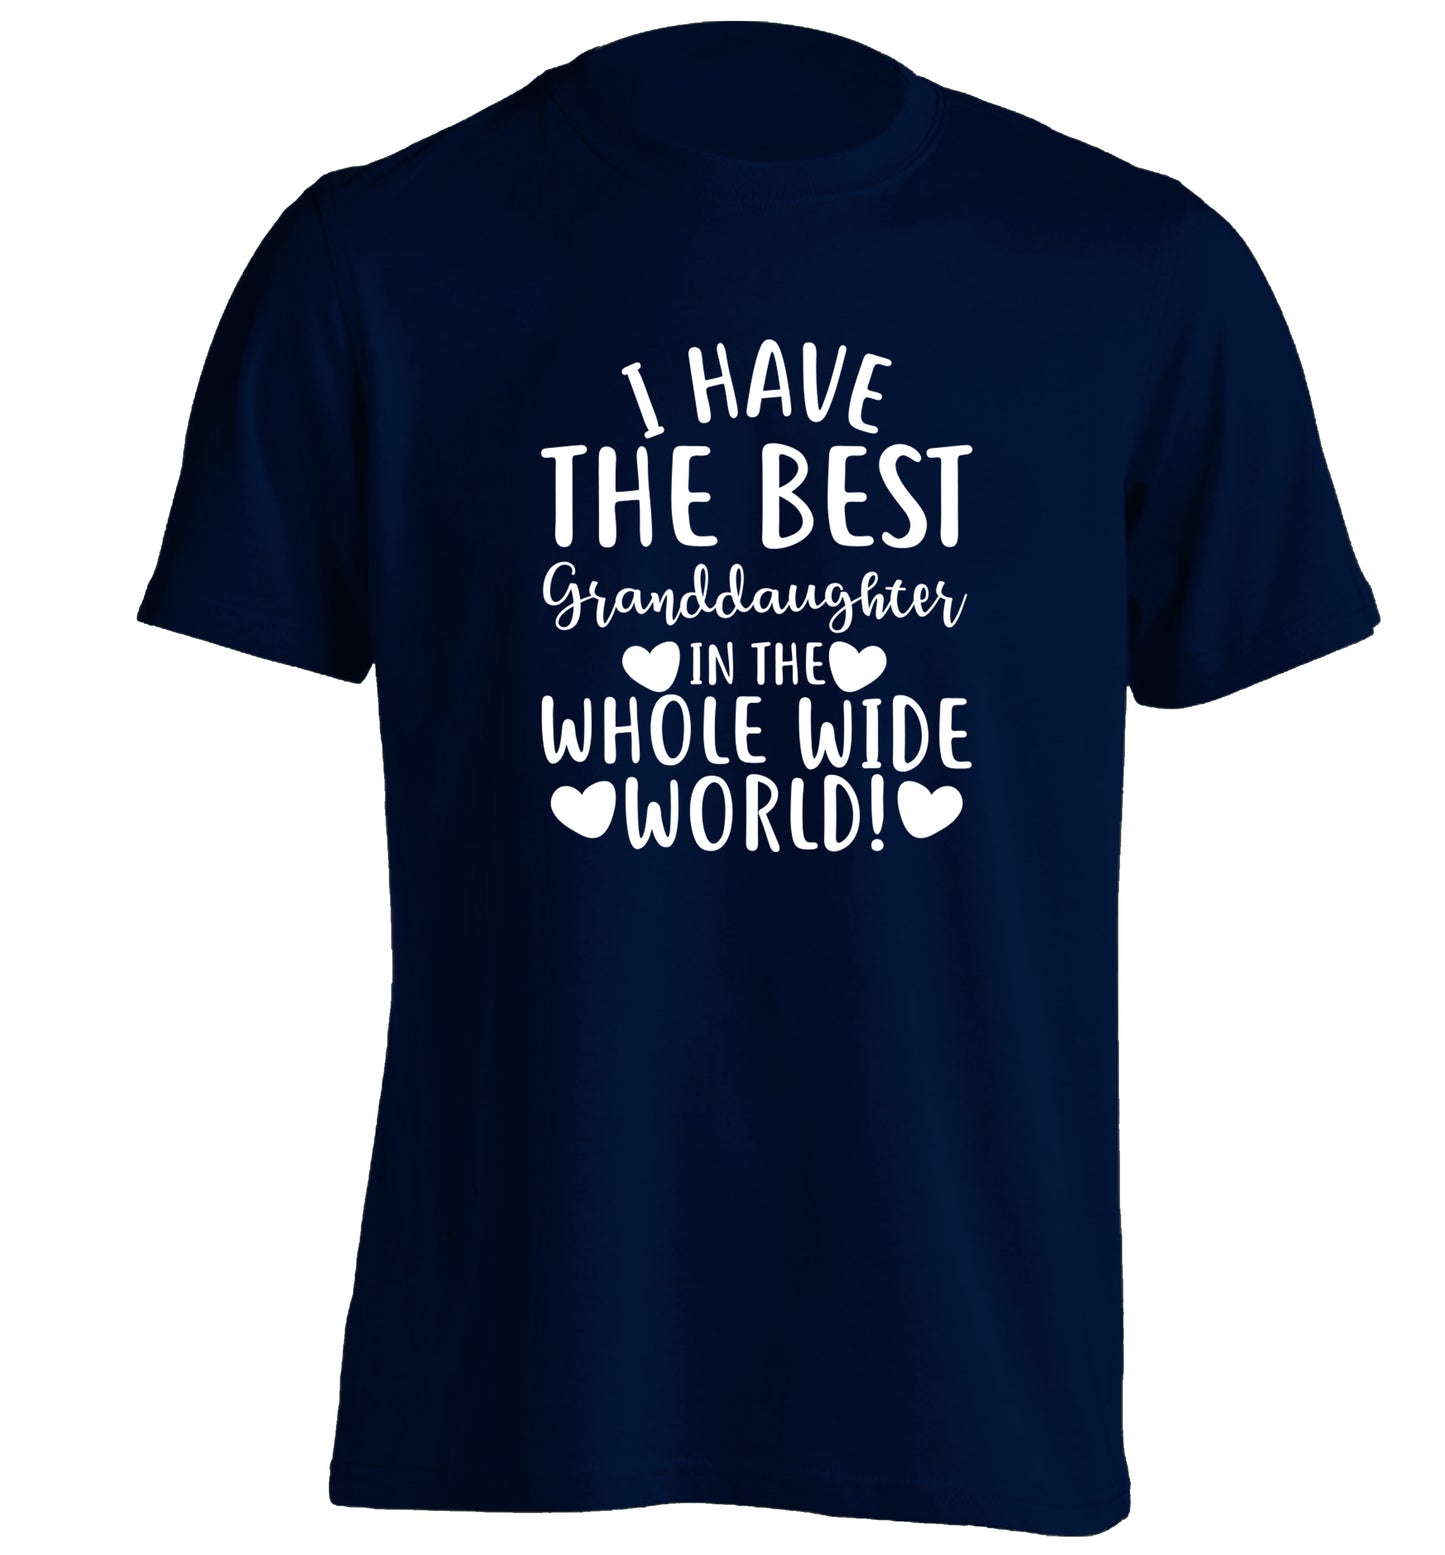 I have the best granddaughter in the whole wide world! adults unisex navy Tshirt 2XL